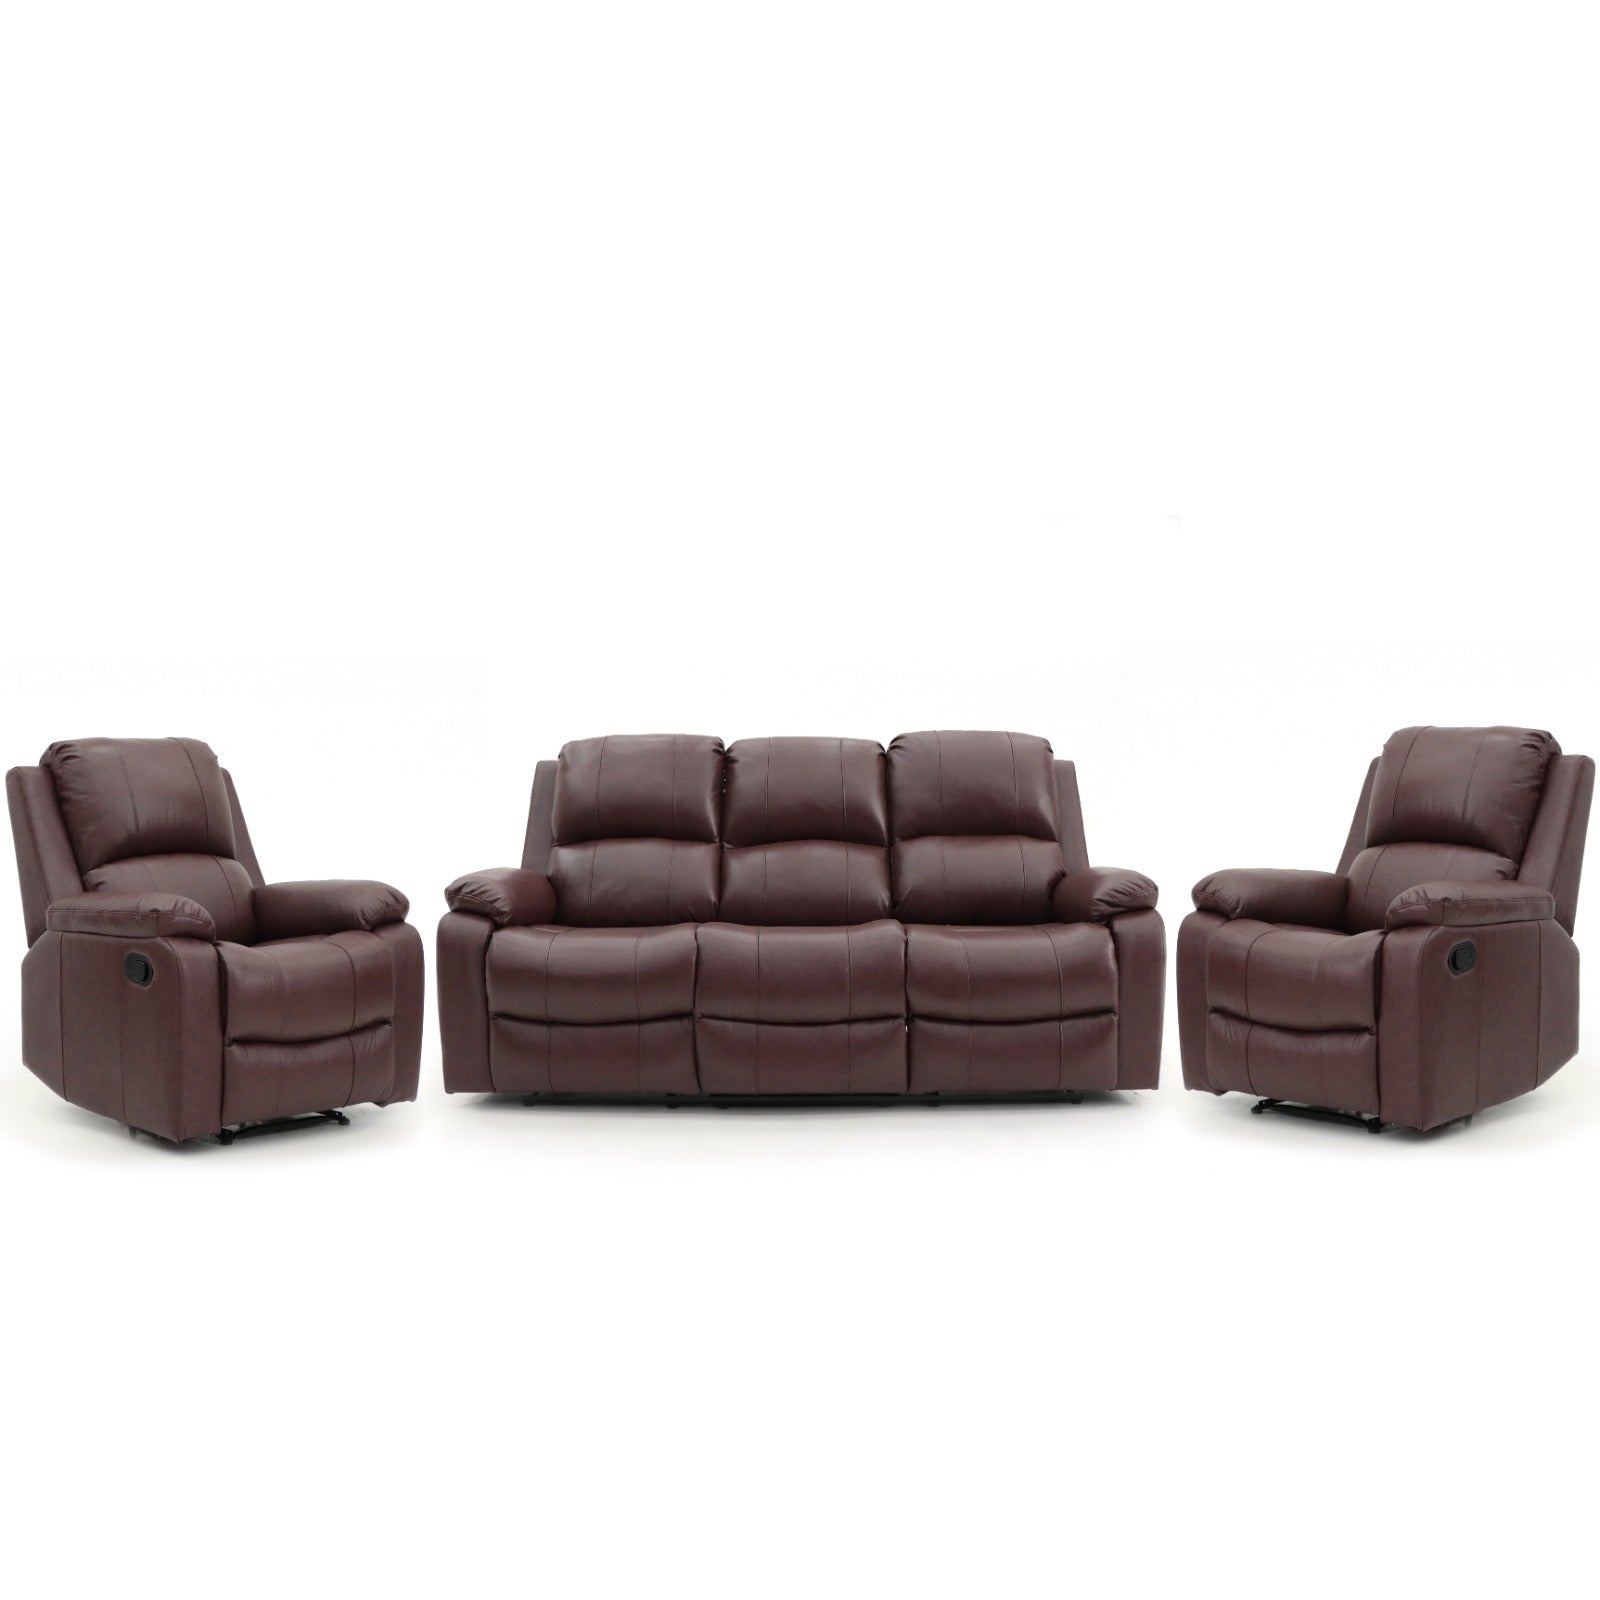 Aston 3 Seater and 2 Chairs Manual Recliner Chestnut Leather